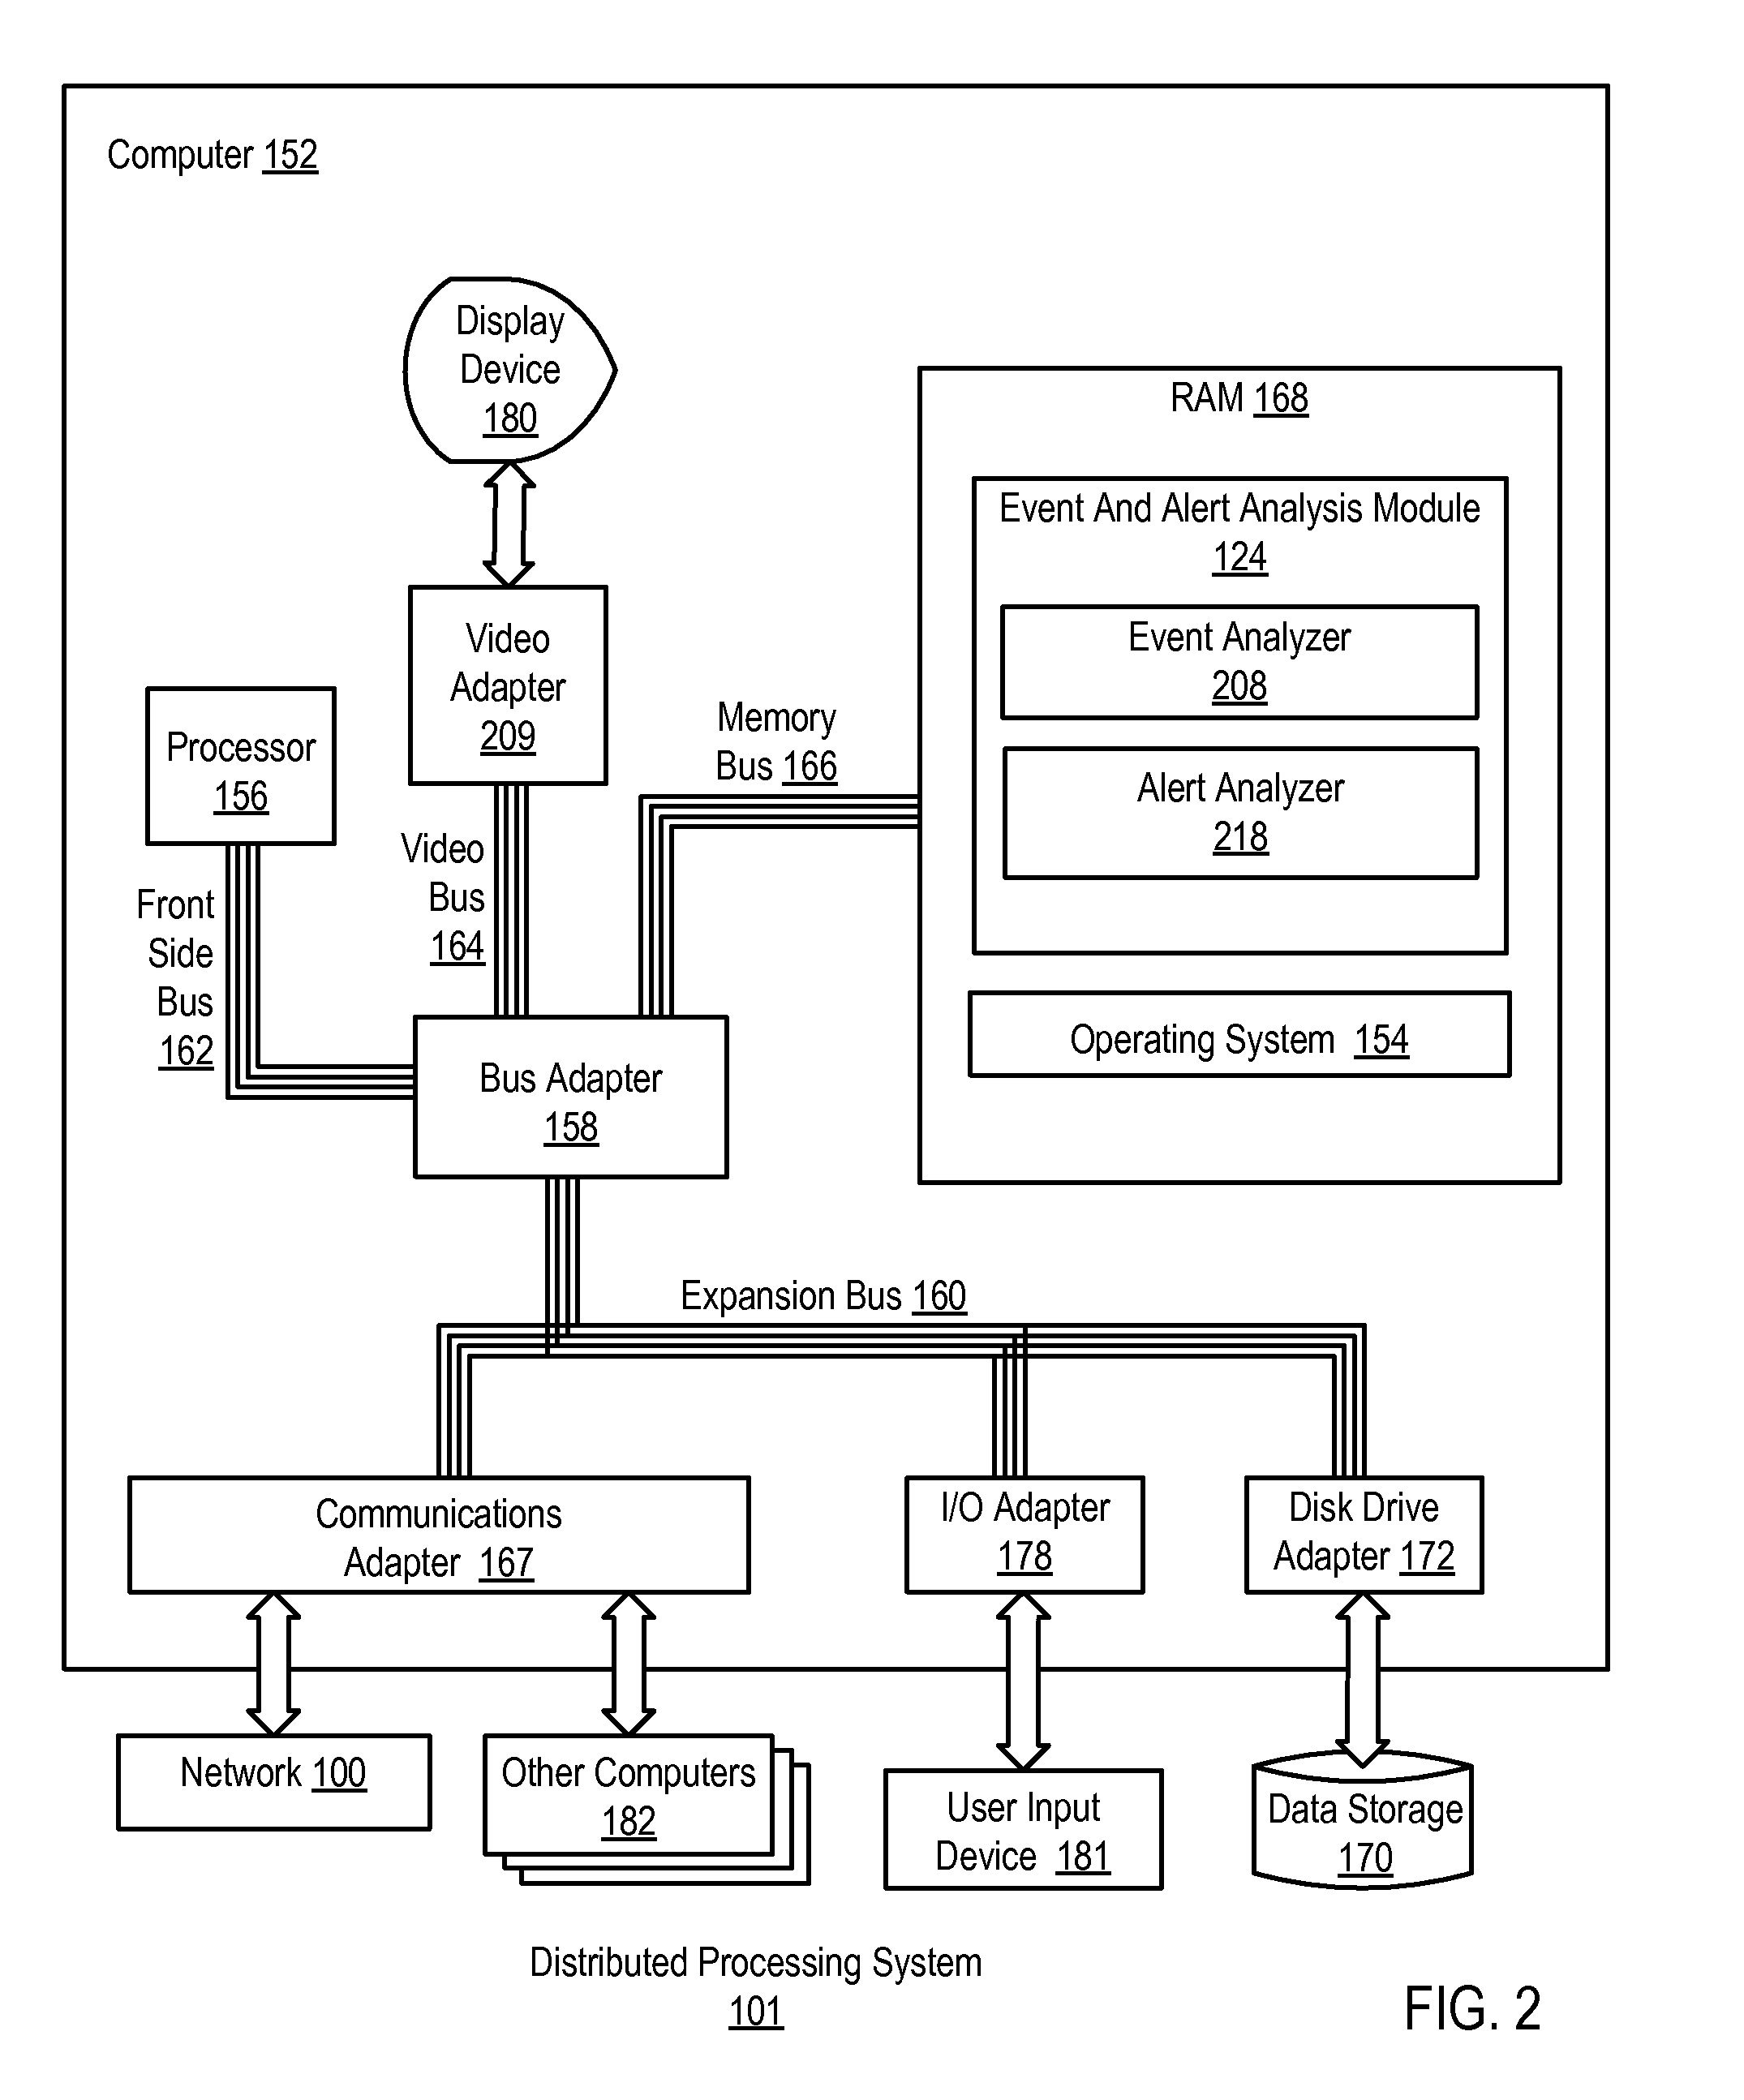 Dynamic Administration Of Event Pools For Relevant Event And Alert Analysis During Event Storms